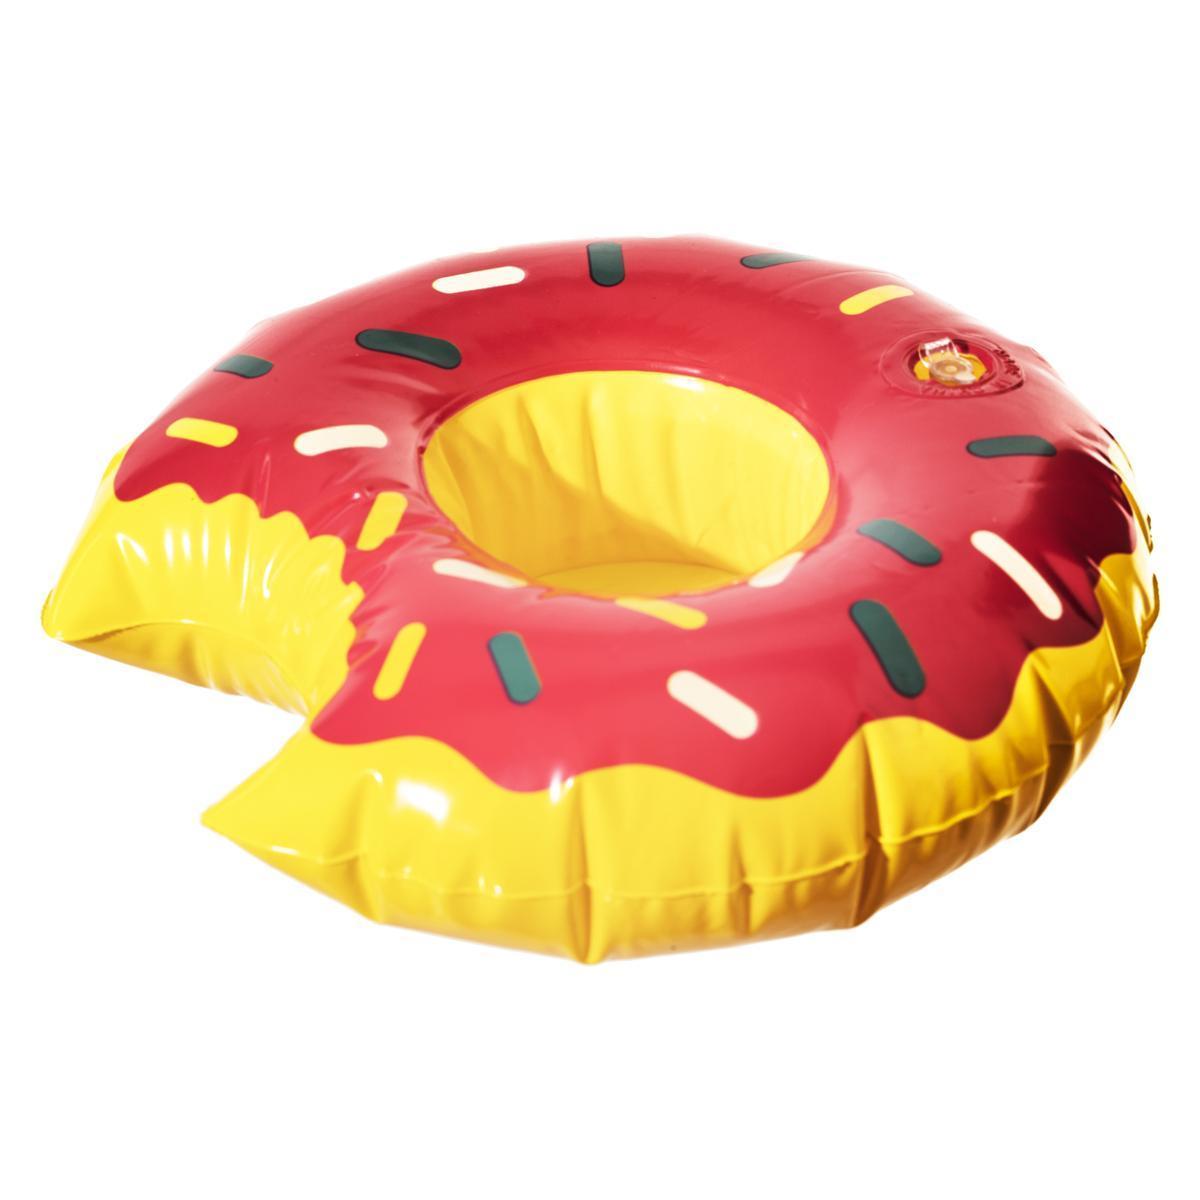 Porte-Gobelet Gonflable Piscine COUCOU, Support Gonflable de